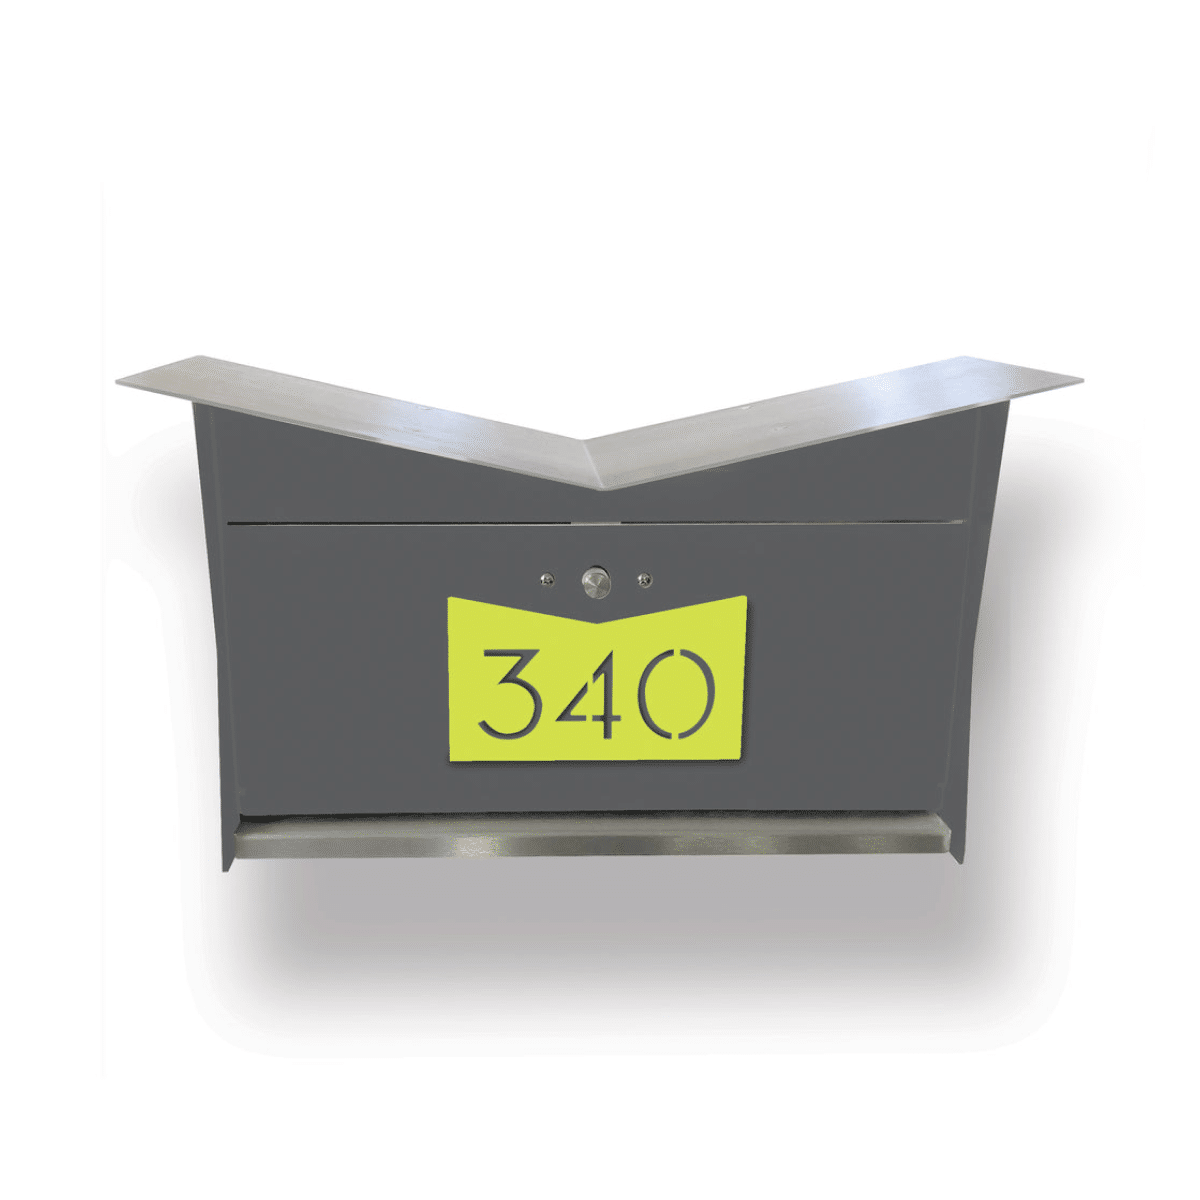 Butterfly Box in Designer Gray – Wall Mount Mailbox Product Image